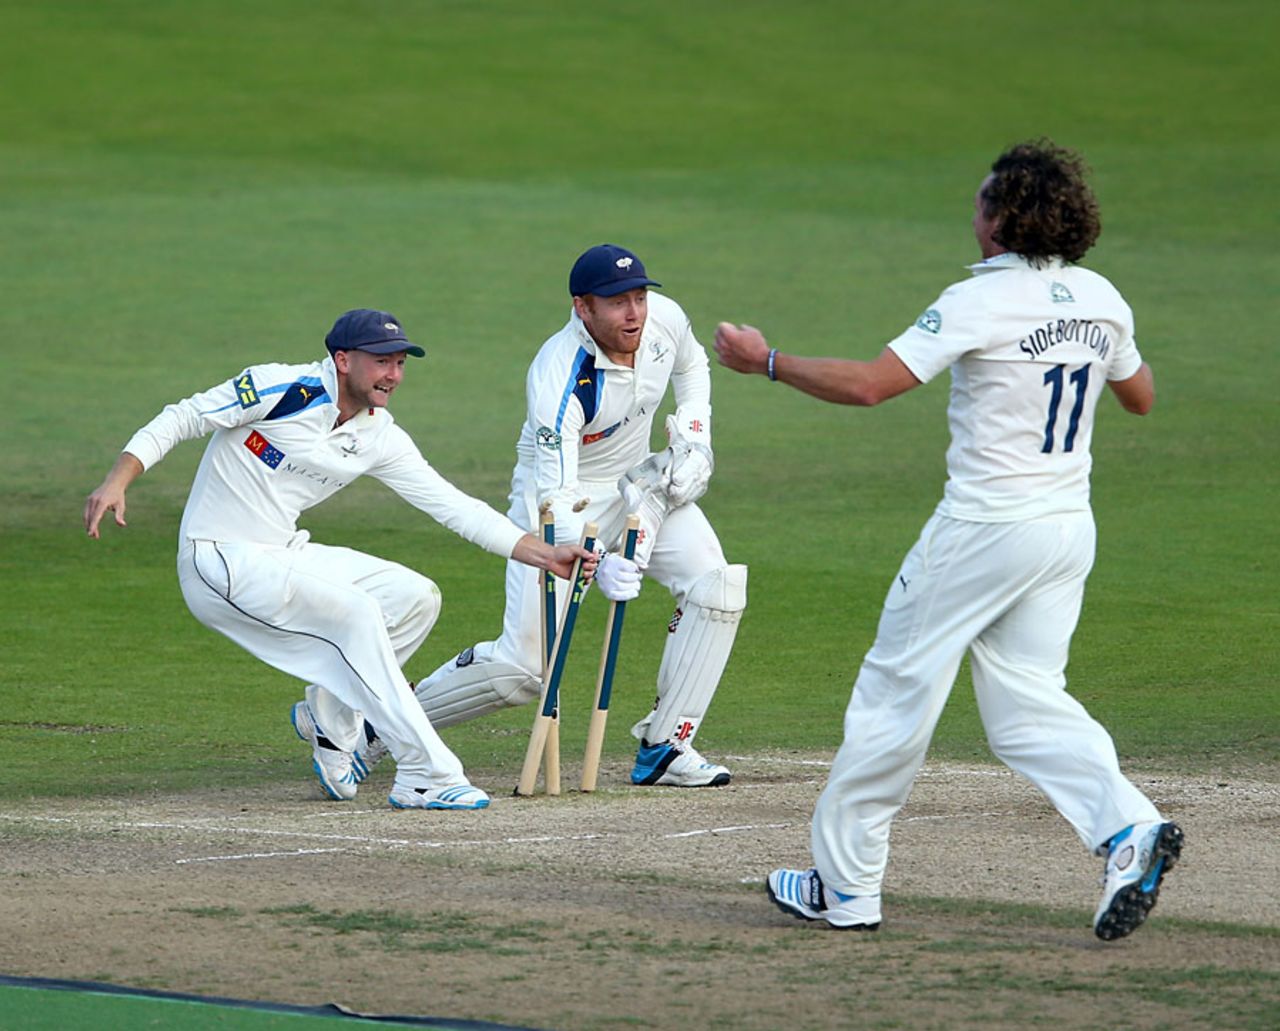 Adam Lyth and Jonny Bairstow race to grab a stump, Nottinghamshire v Yorkshire, County Championship, Division One, Trent Bridge, September 12, 2014